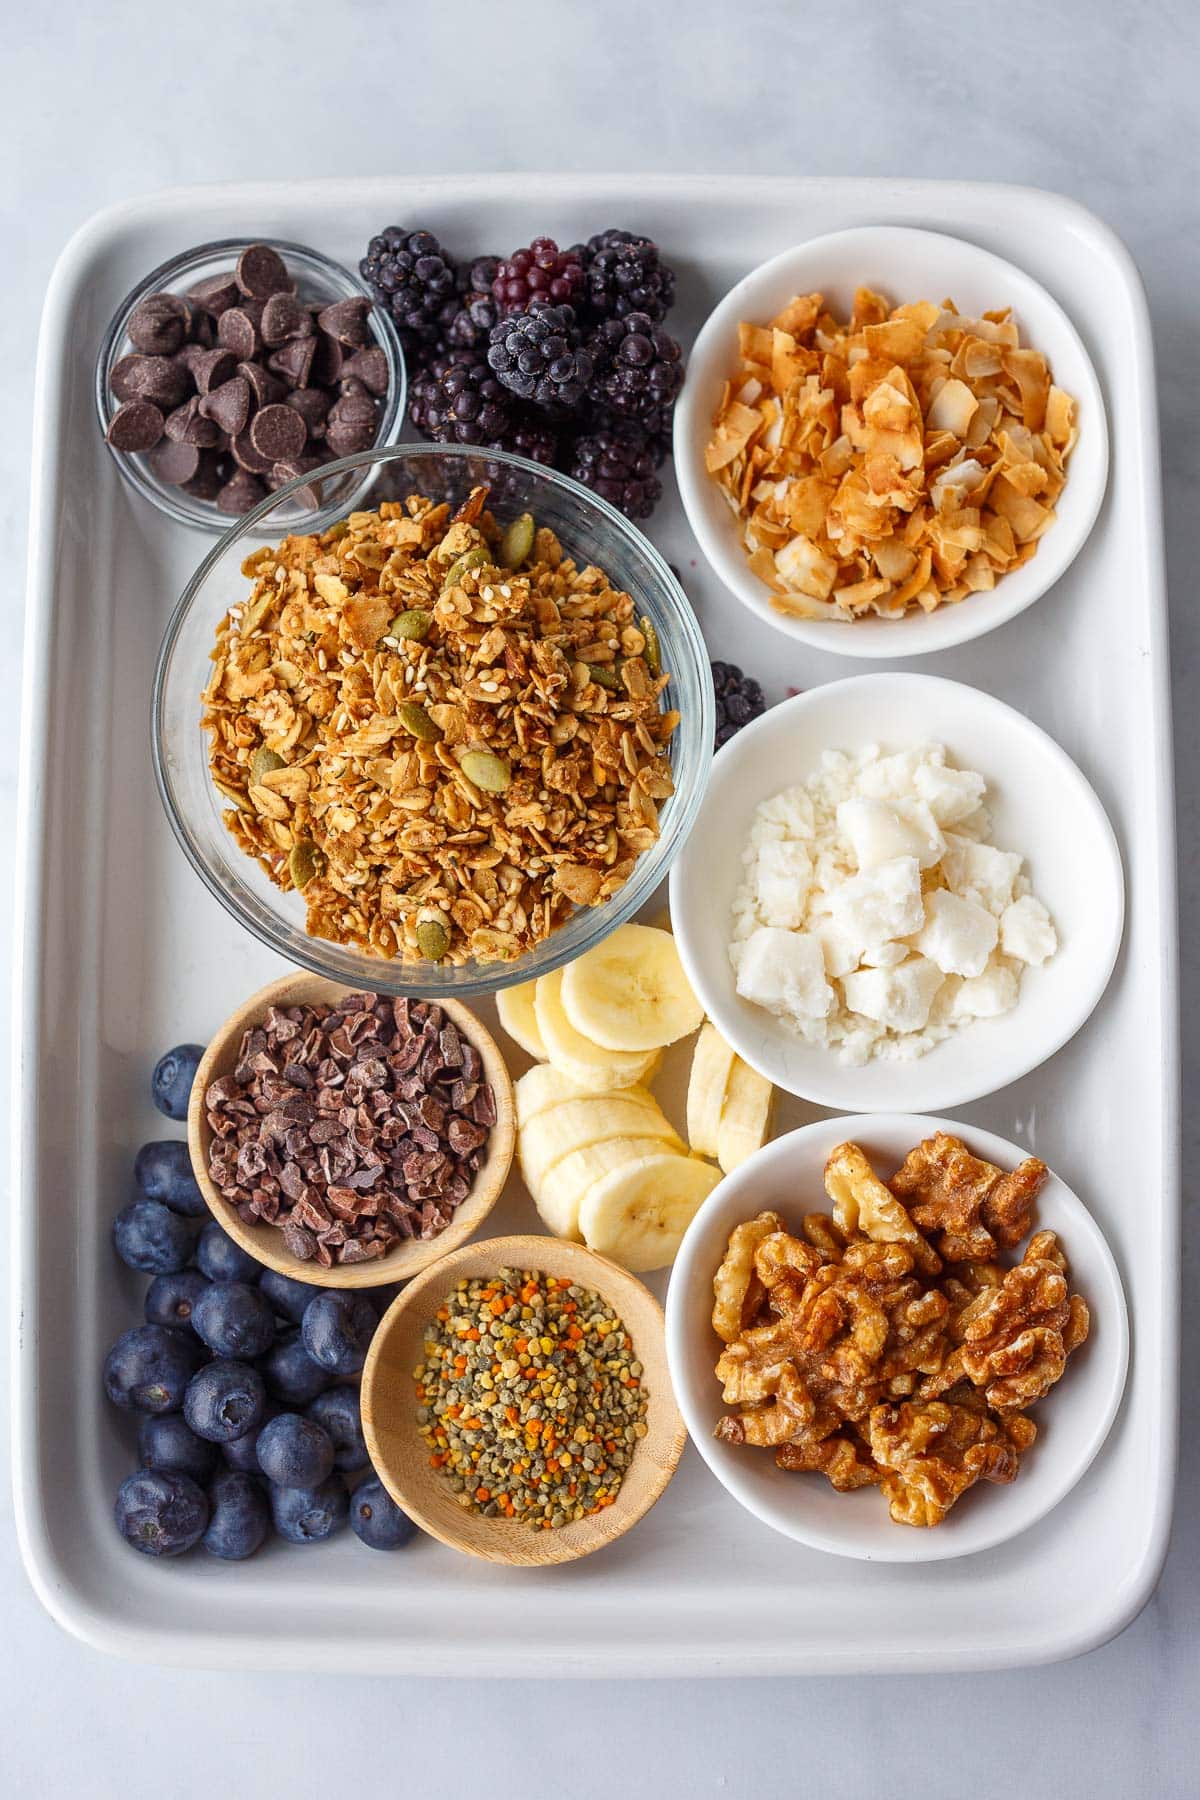 toppings for acai bowls- dark chocolate chips, blackberries, toasted coconut, granola, sliced bananas, walnuts, bee pollen, cacao nibs, blueberries.